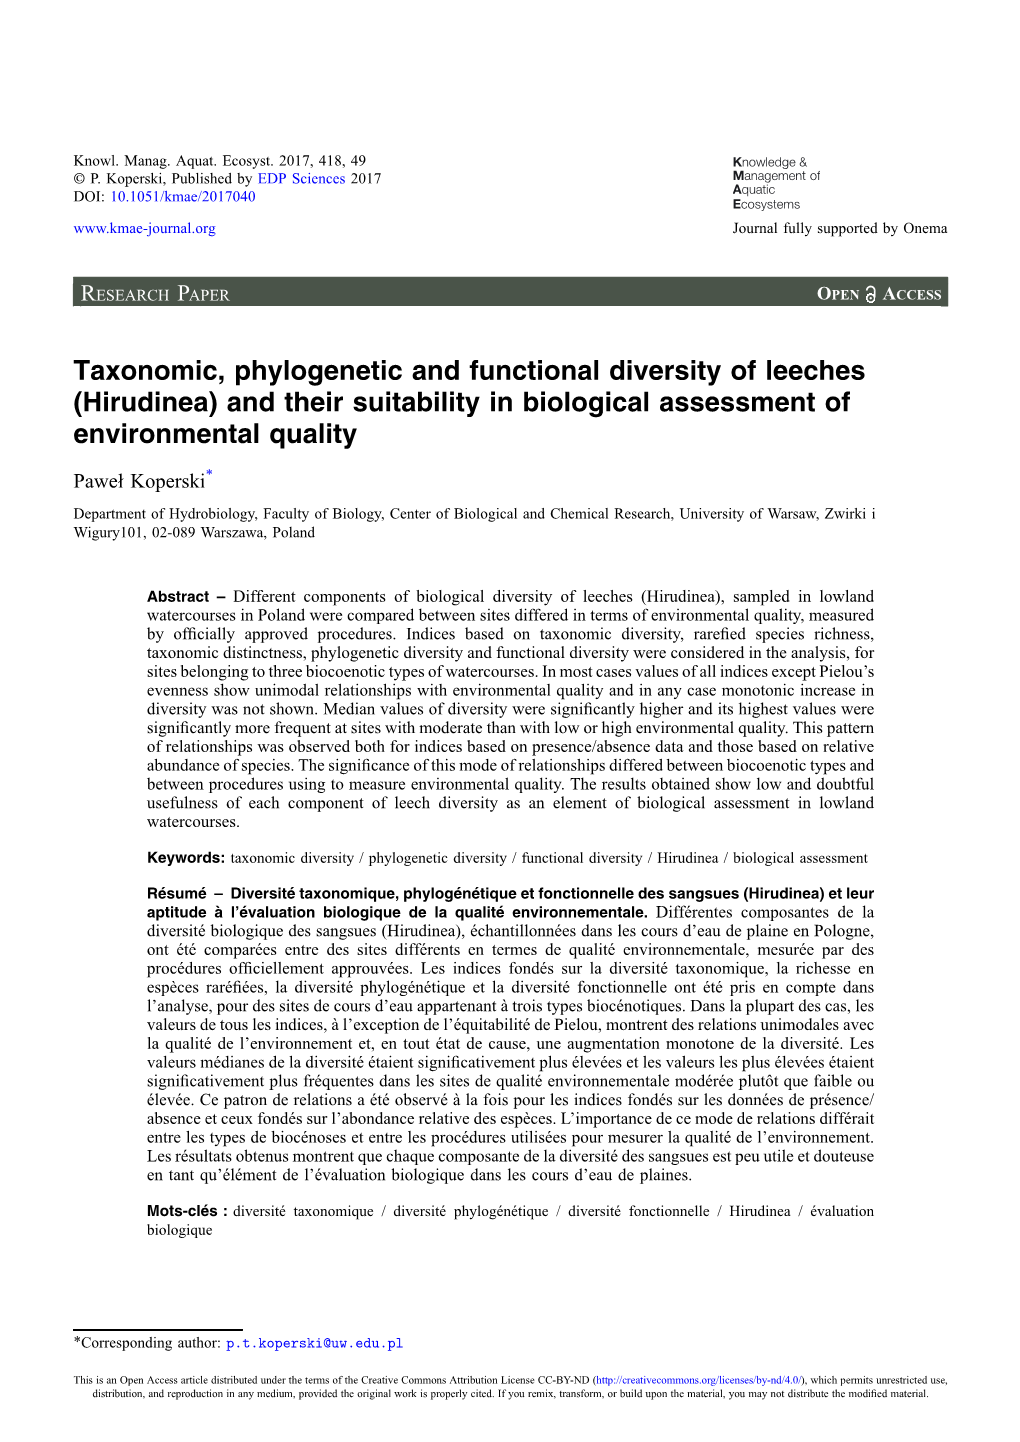 Taxonomic, Phylogenetic and Functional Diversity of Leeches (Hirudinea) and Their Suitability in Biological Assessment of Environmental Quality